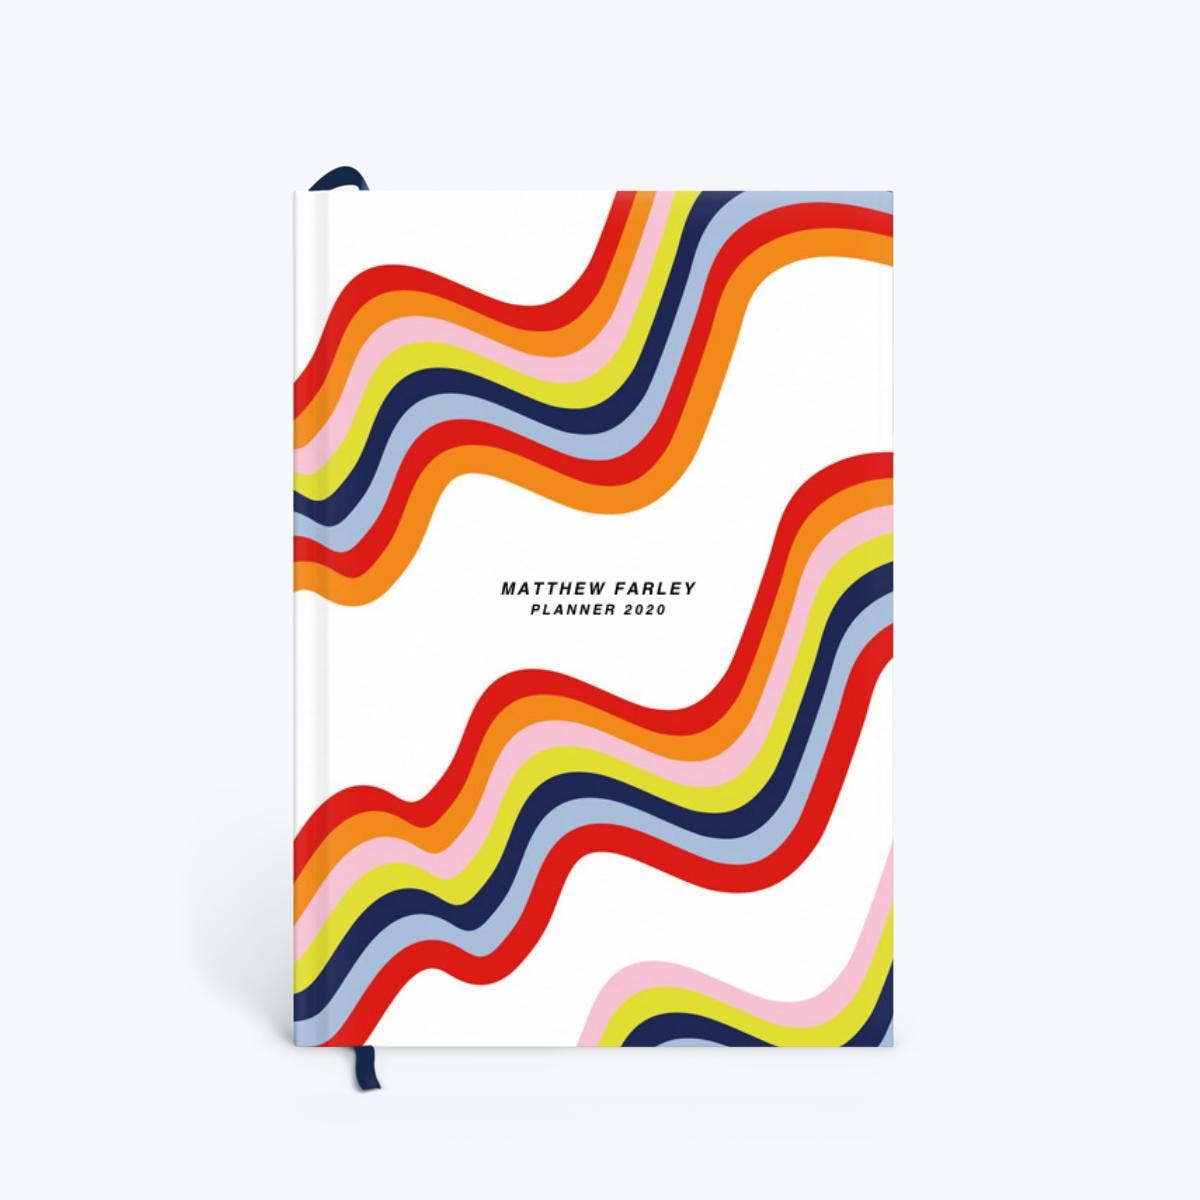 A personalized planner book with a wavy rainbow design on the cover.